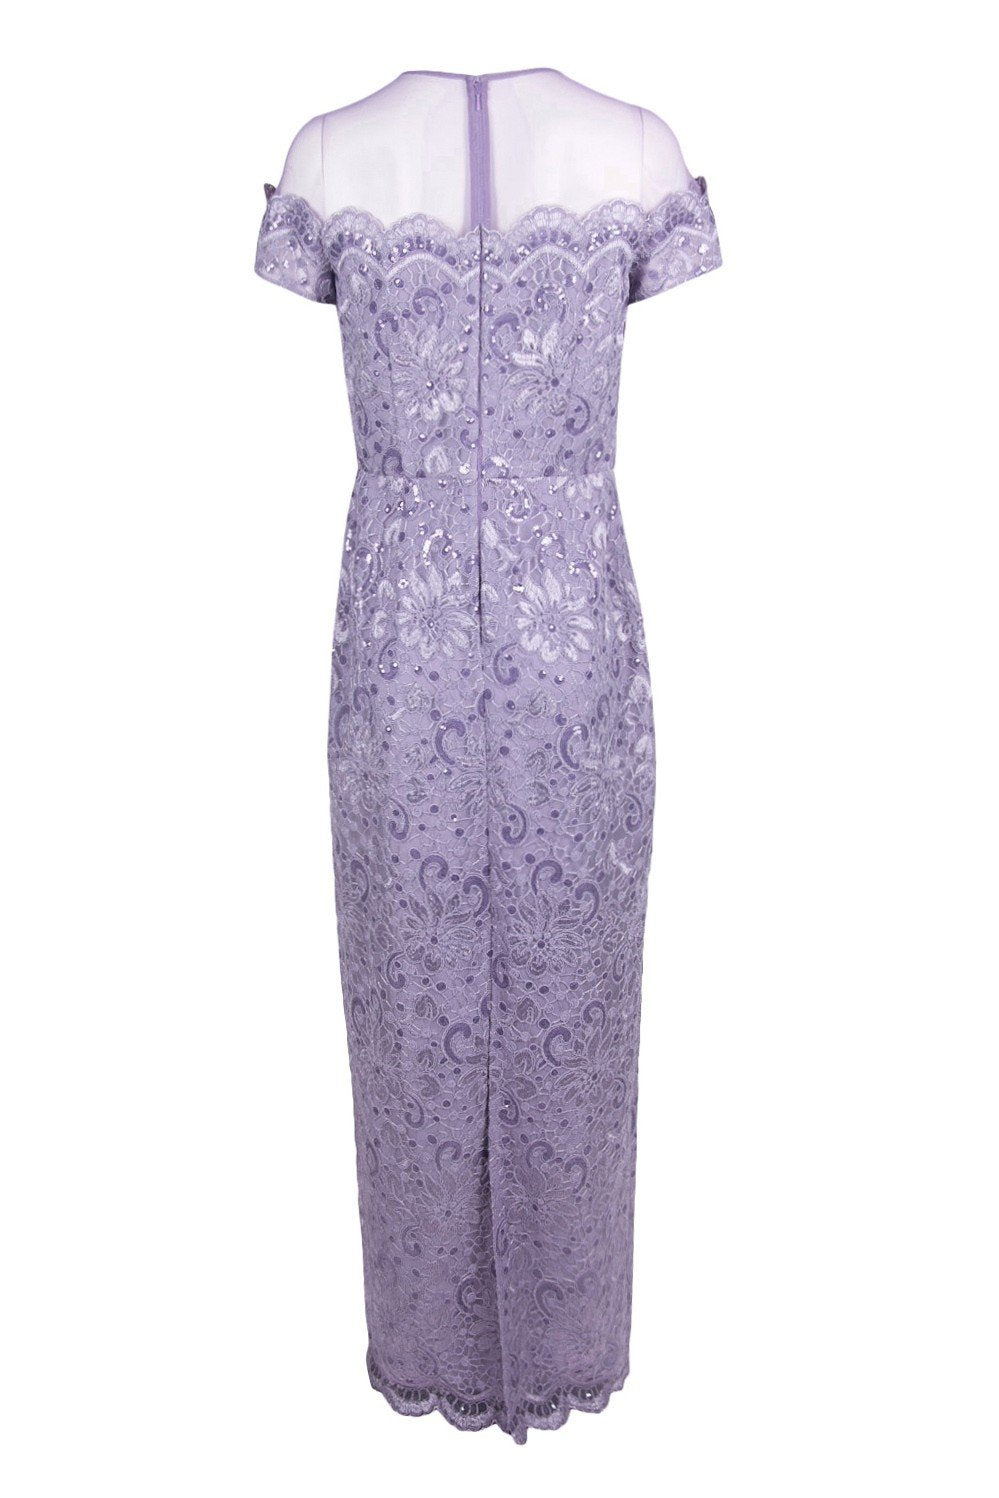 JS Collections - 866648 Illusion Floral Lace Embroidered Mesh Dress In Purple